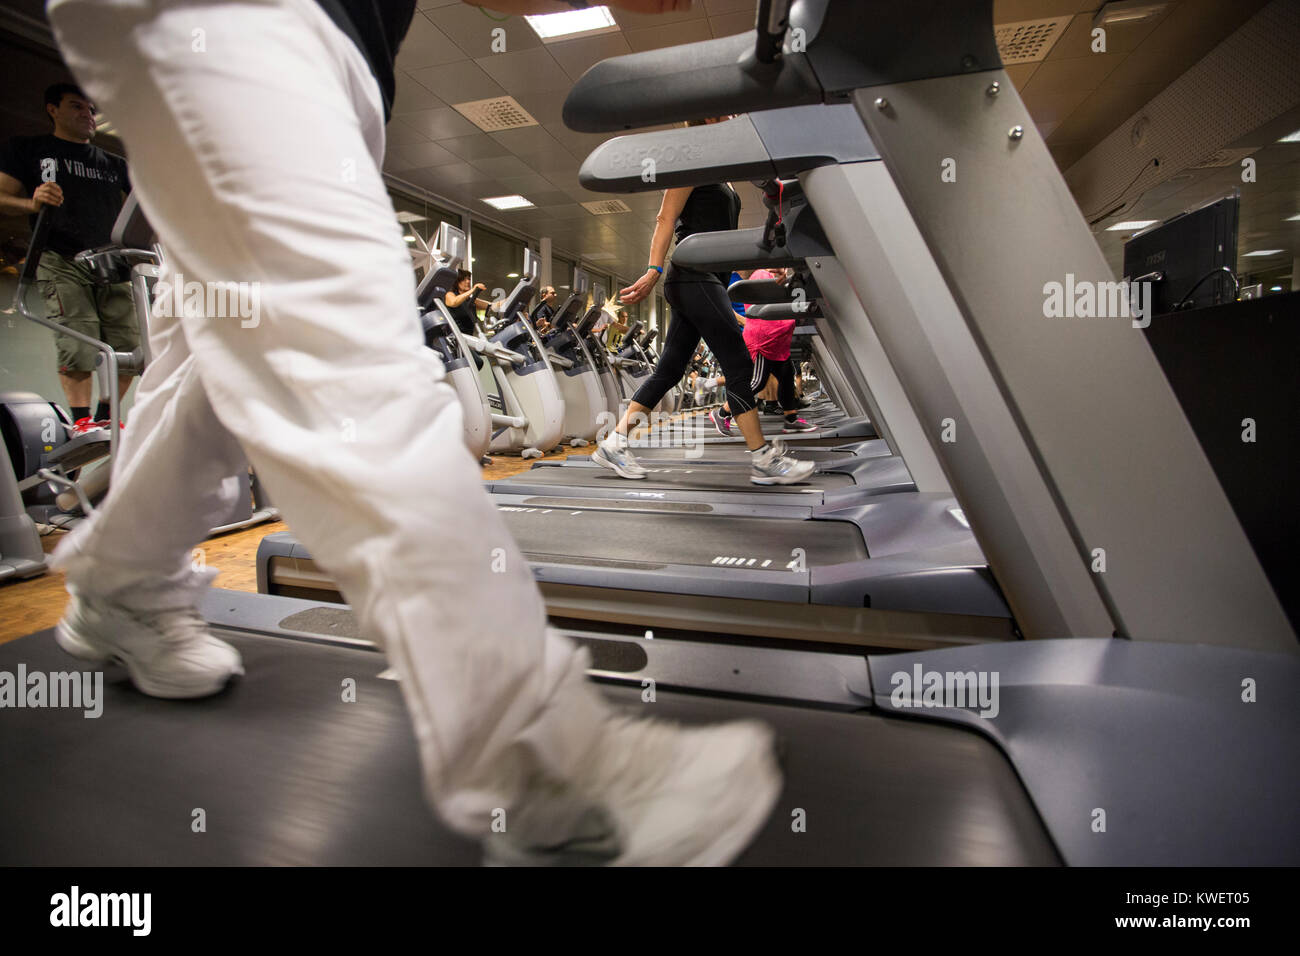 Exercise at the gym, Sollentuna, Sweden. Stock Photo